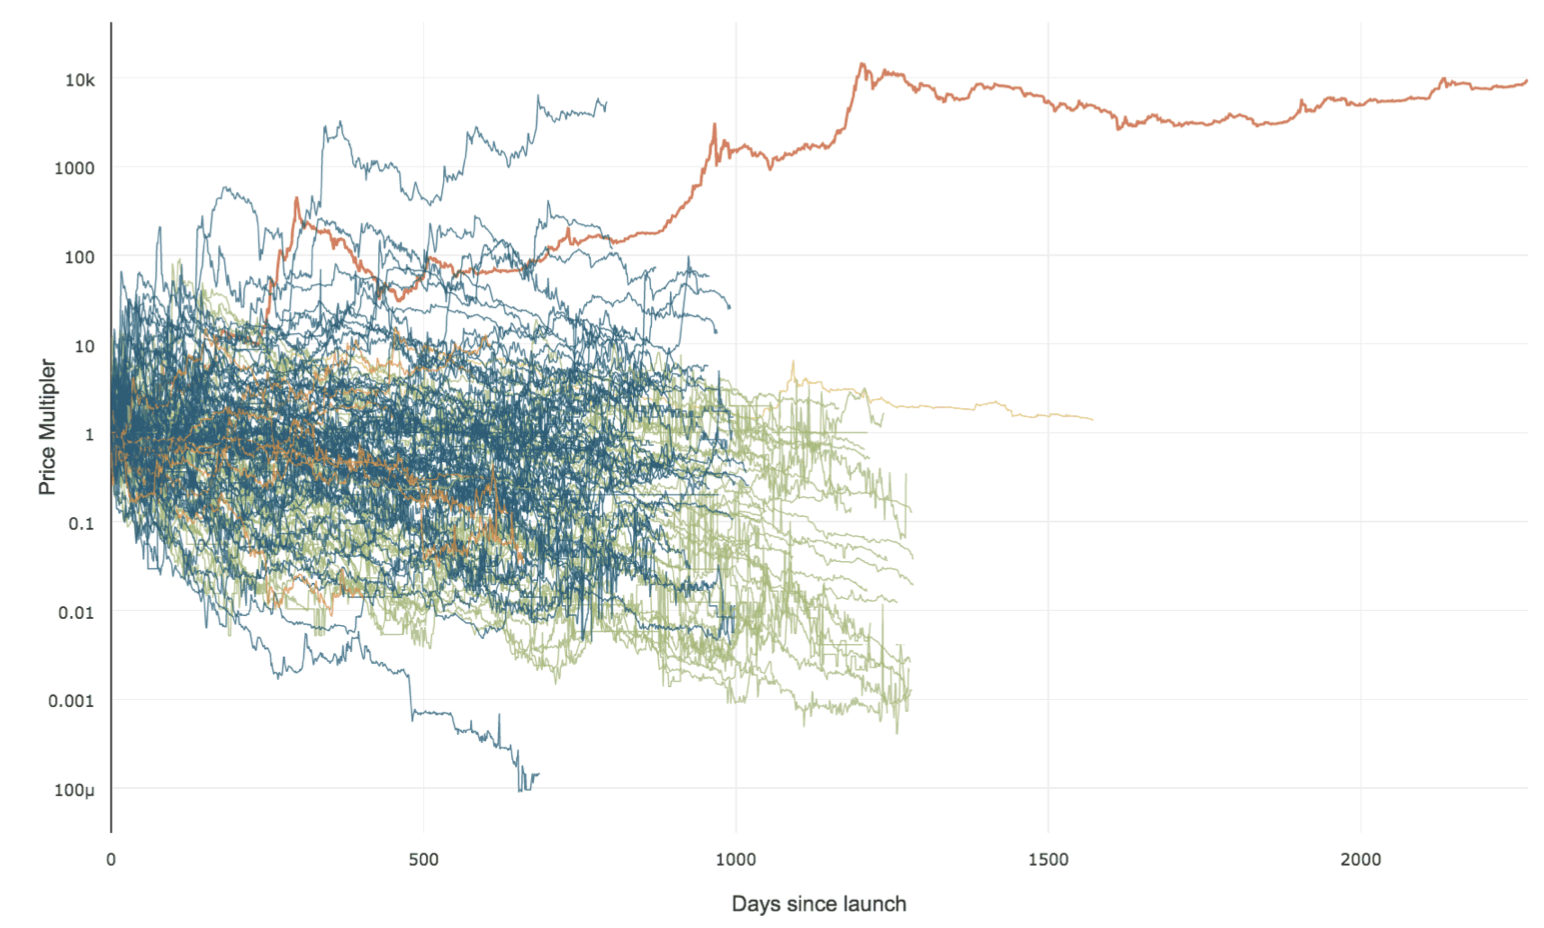 118 coins (with more than 250k Market Capitalization) -  https://woobull.com/data-visualisation-118-coins-plotted-over-time-this-is-why-hodl-alt-coin-indexes-dont-work/